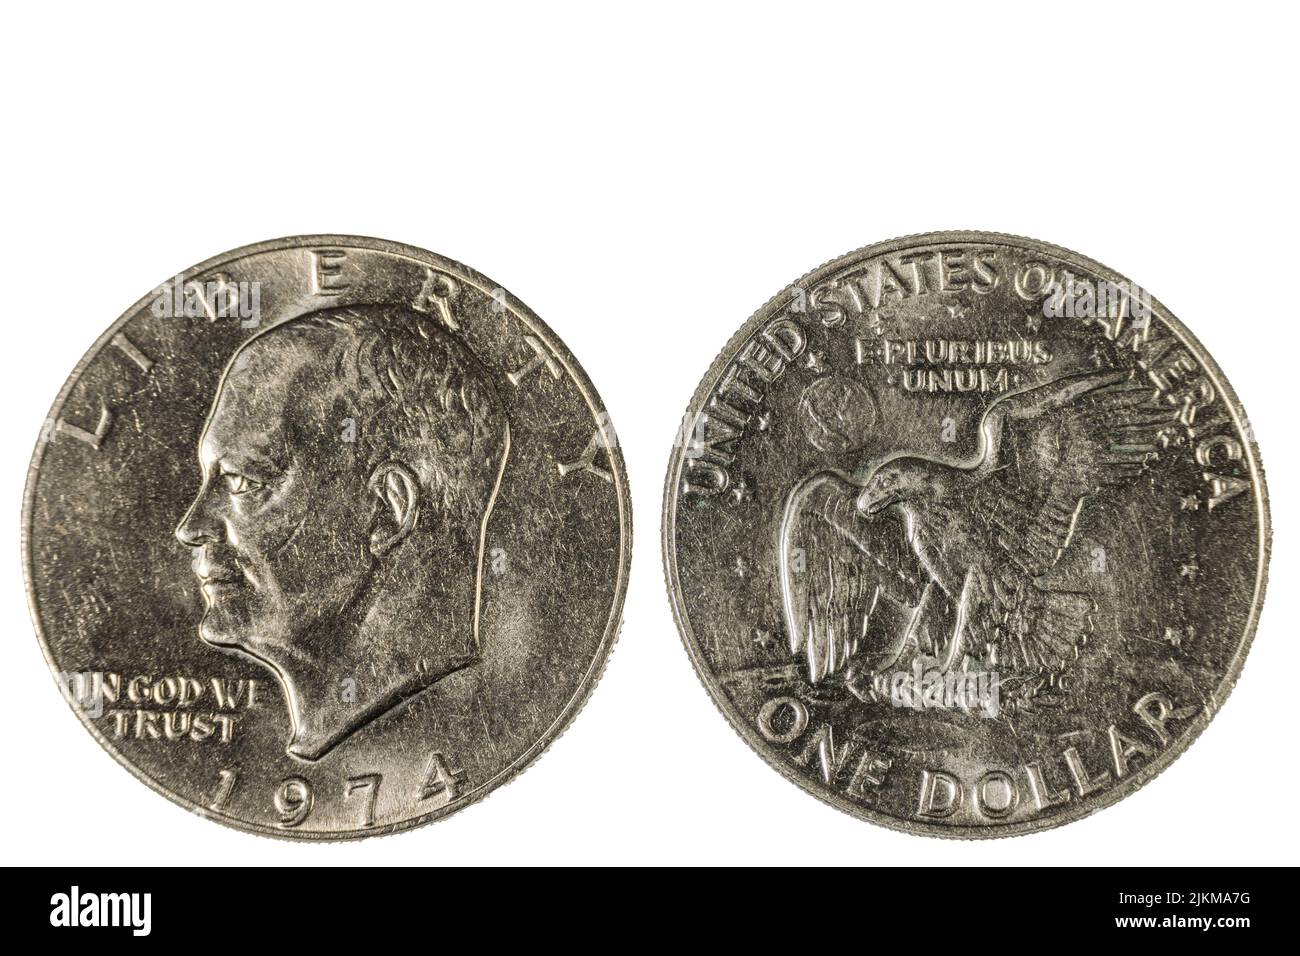 Close up view of front and back side of one usa dollar silver coin dated 1974. Numismatic concept. Stock Photo